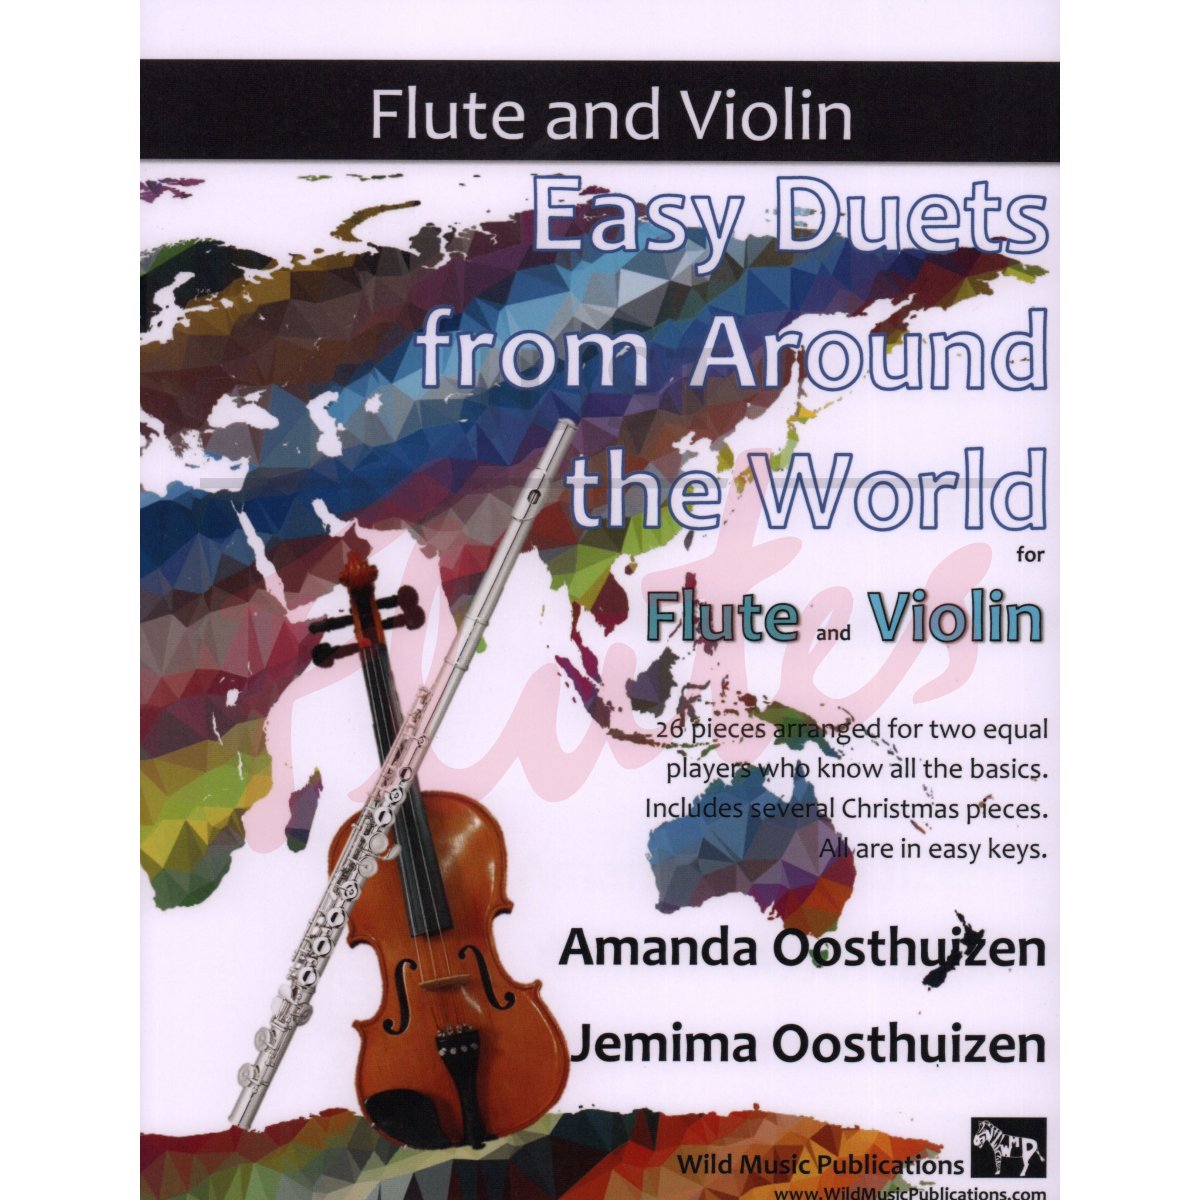 Easy Duets from Around the World for Flute and Violin